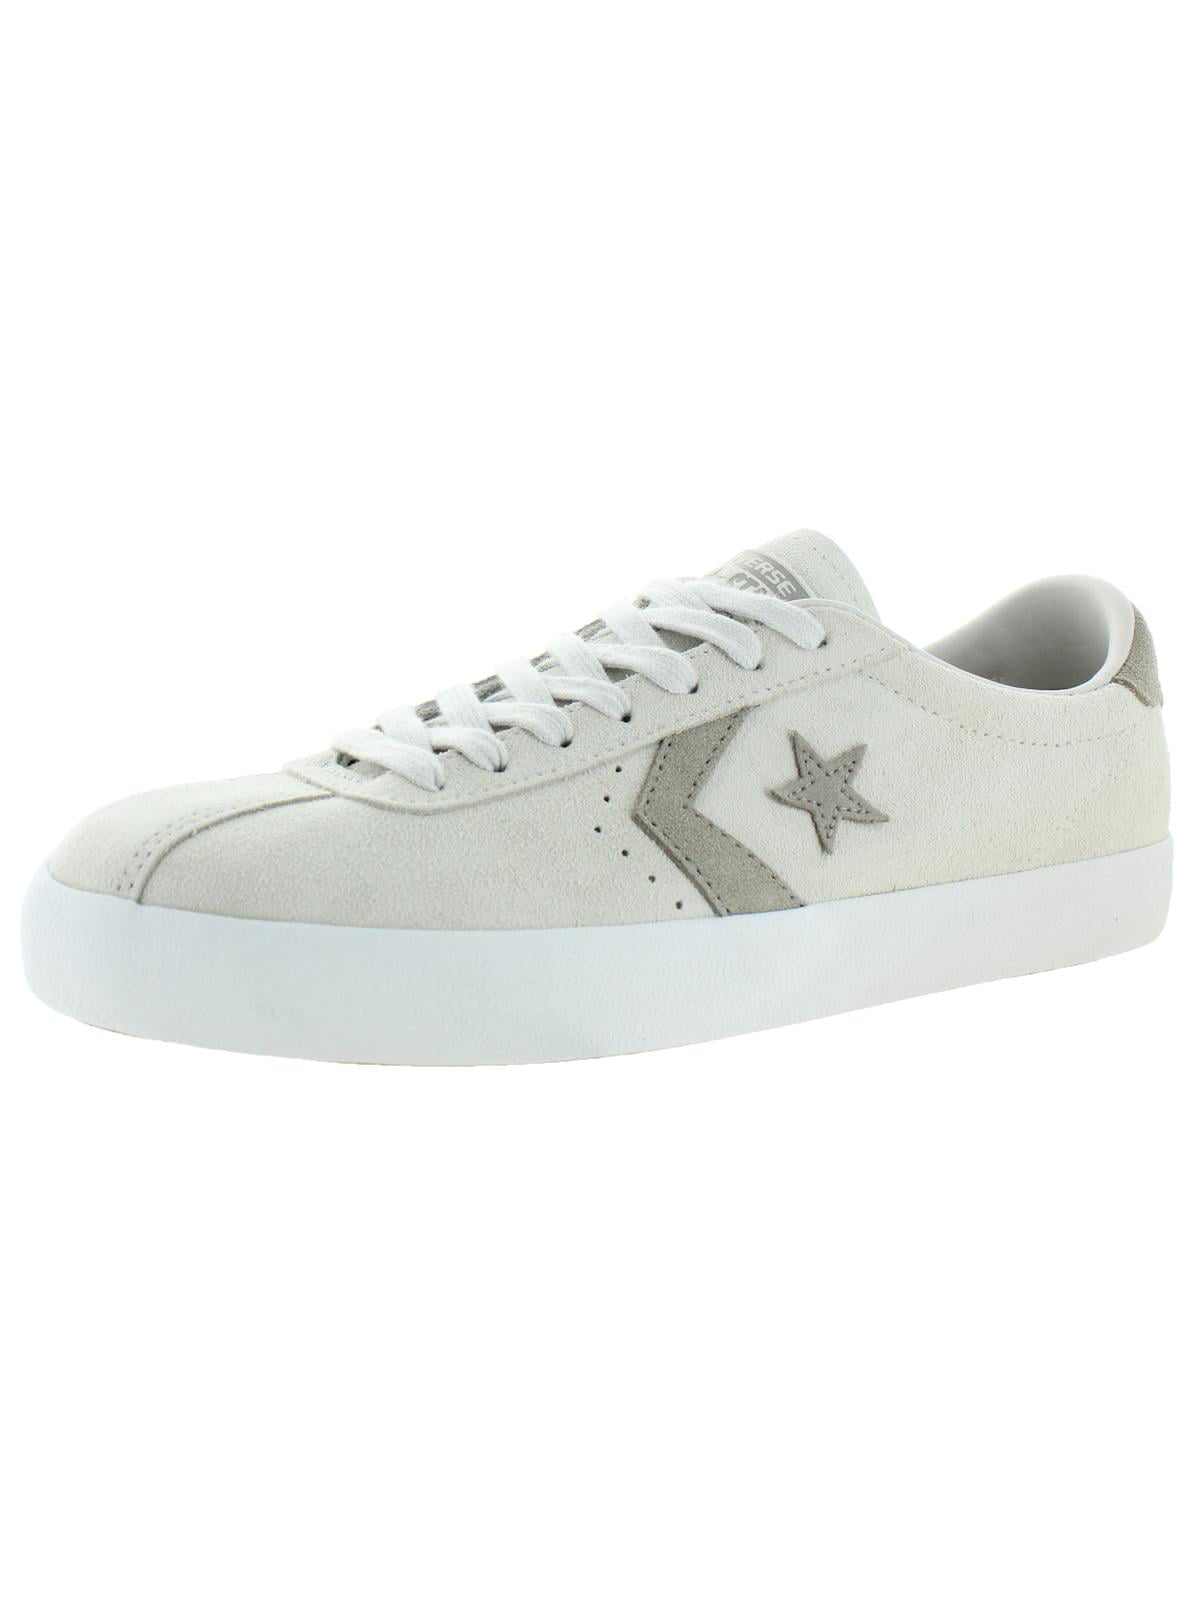 converse breakpoint trainers